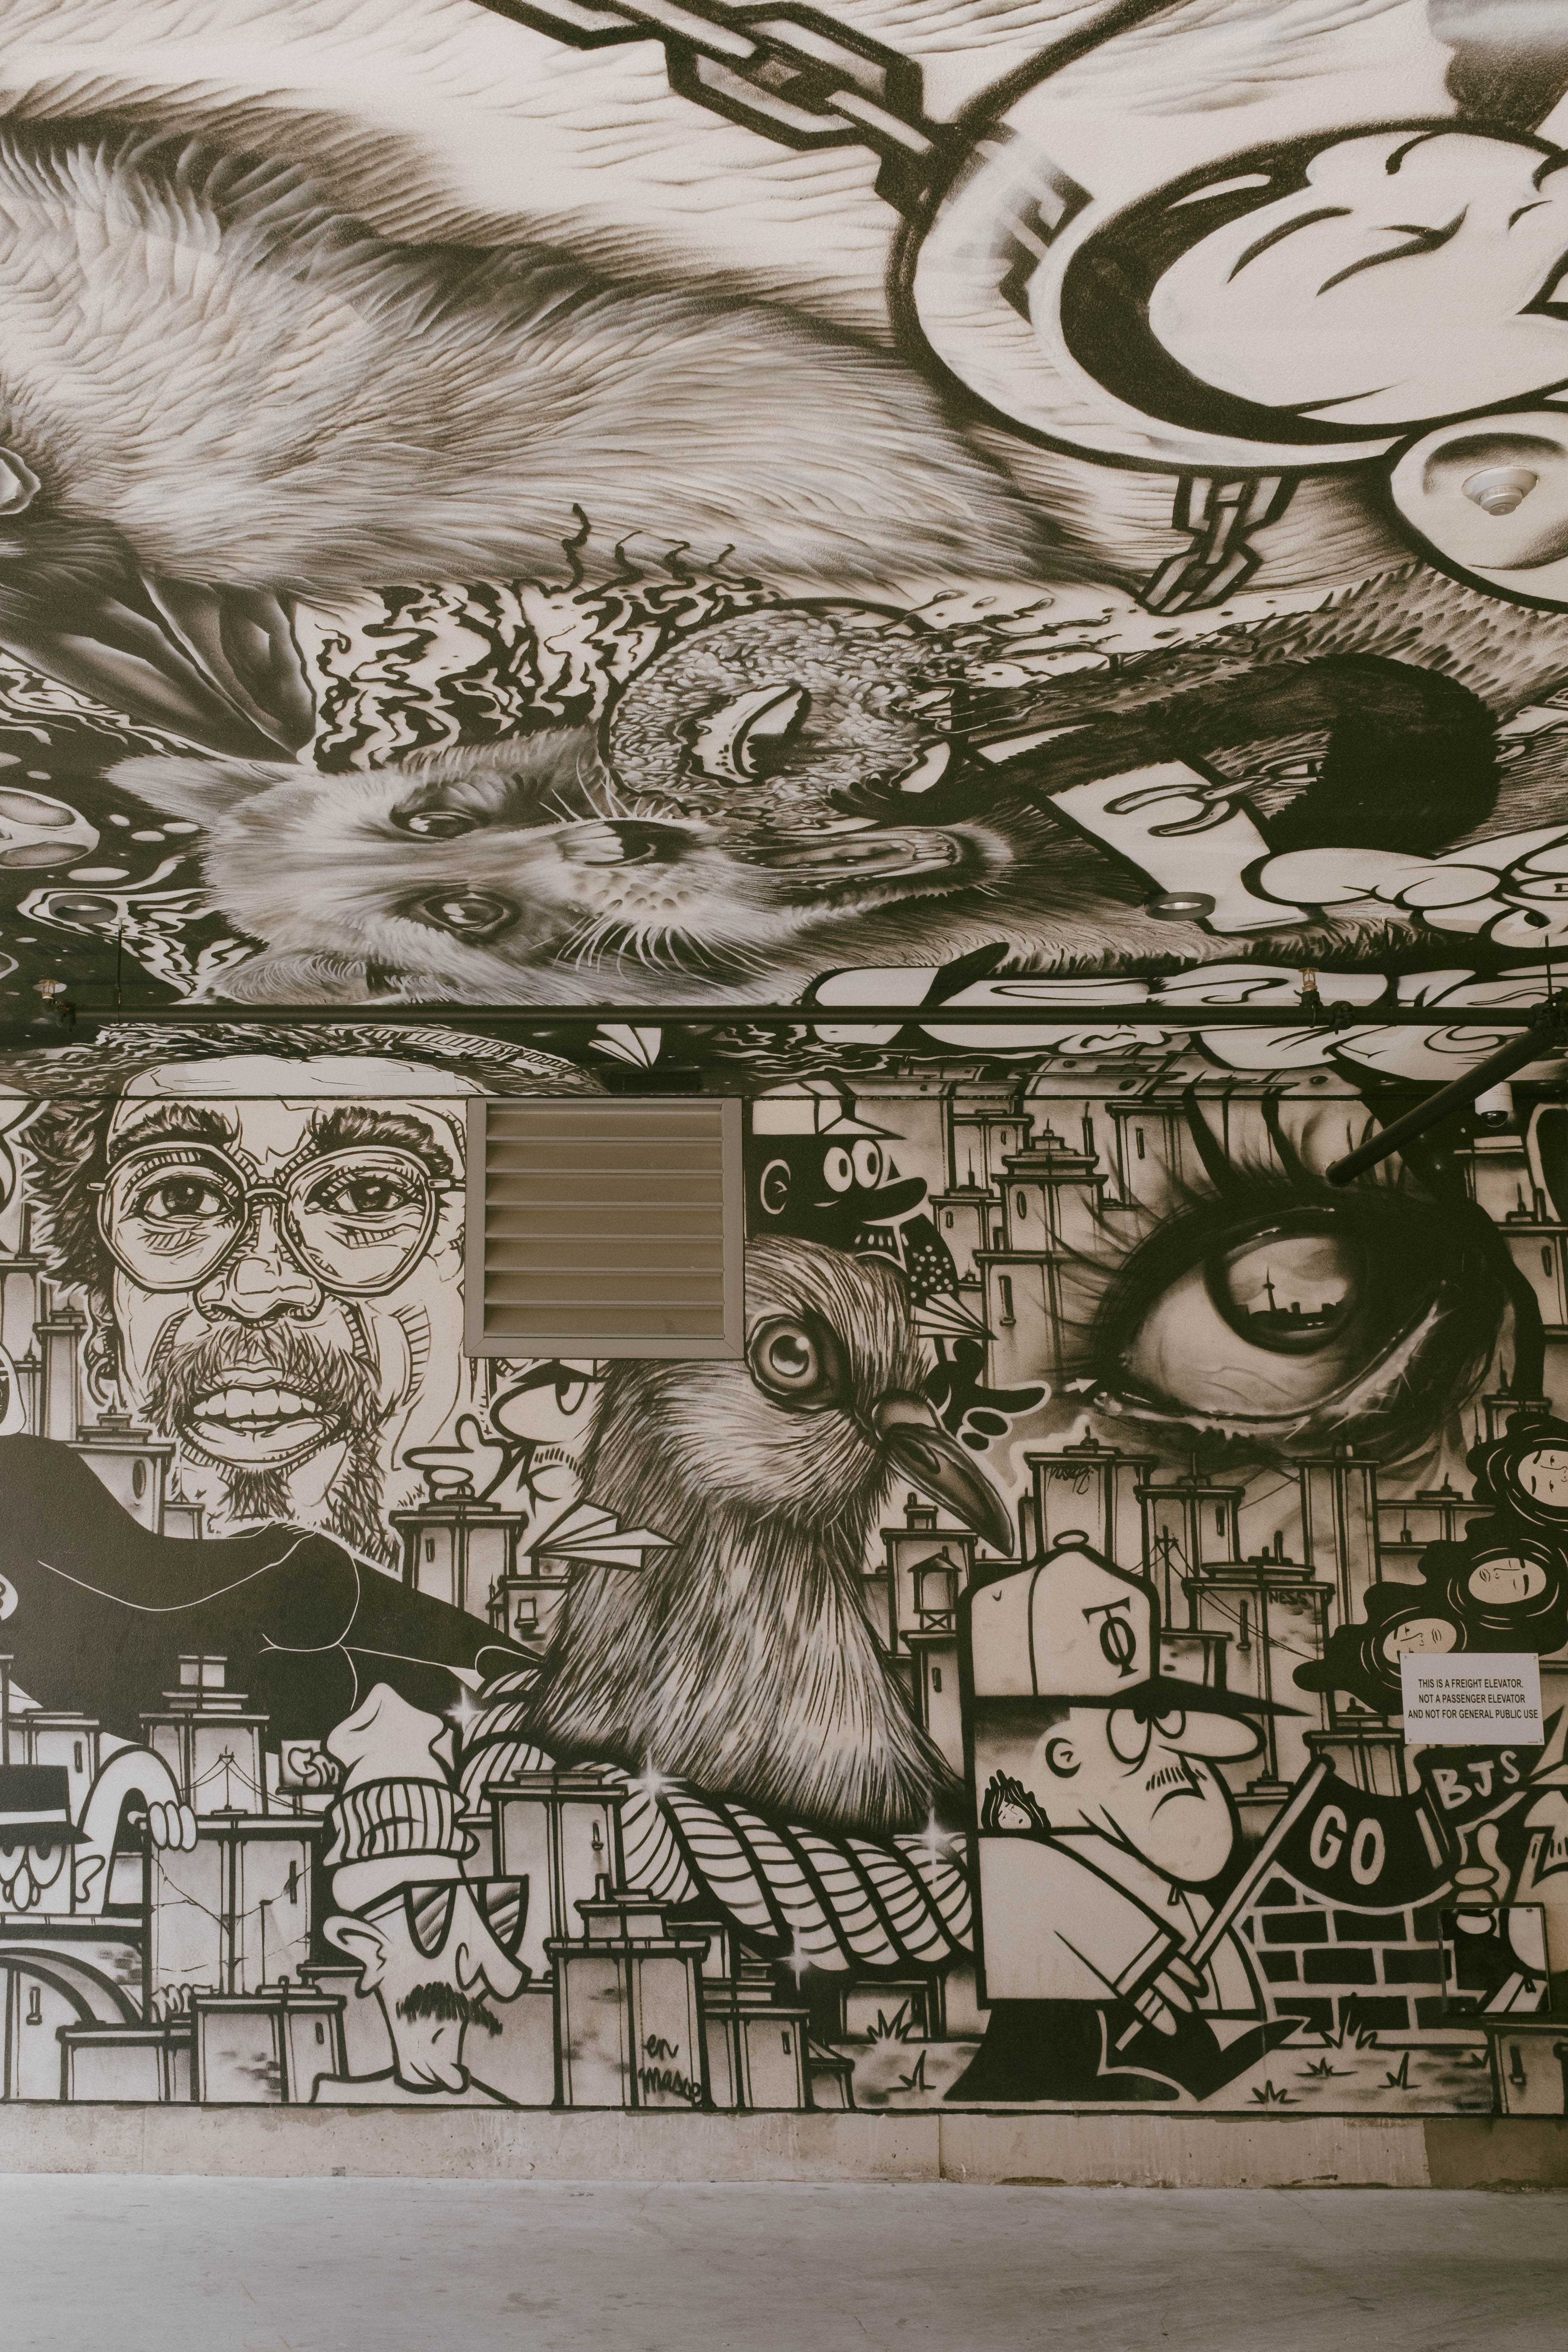 Elaborate black and white mural spreading to the ceiling